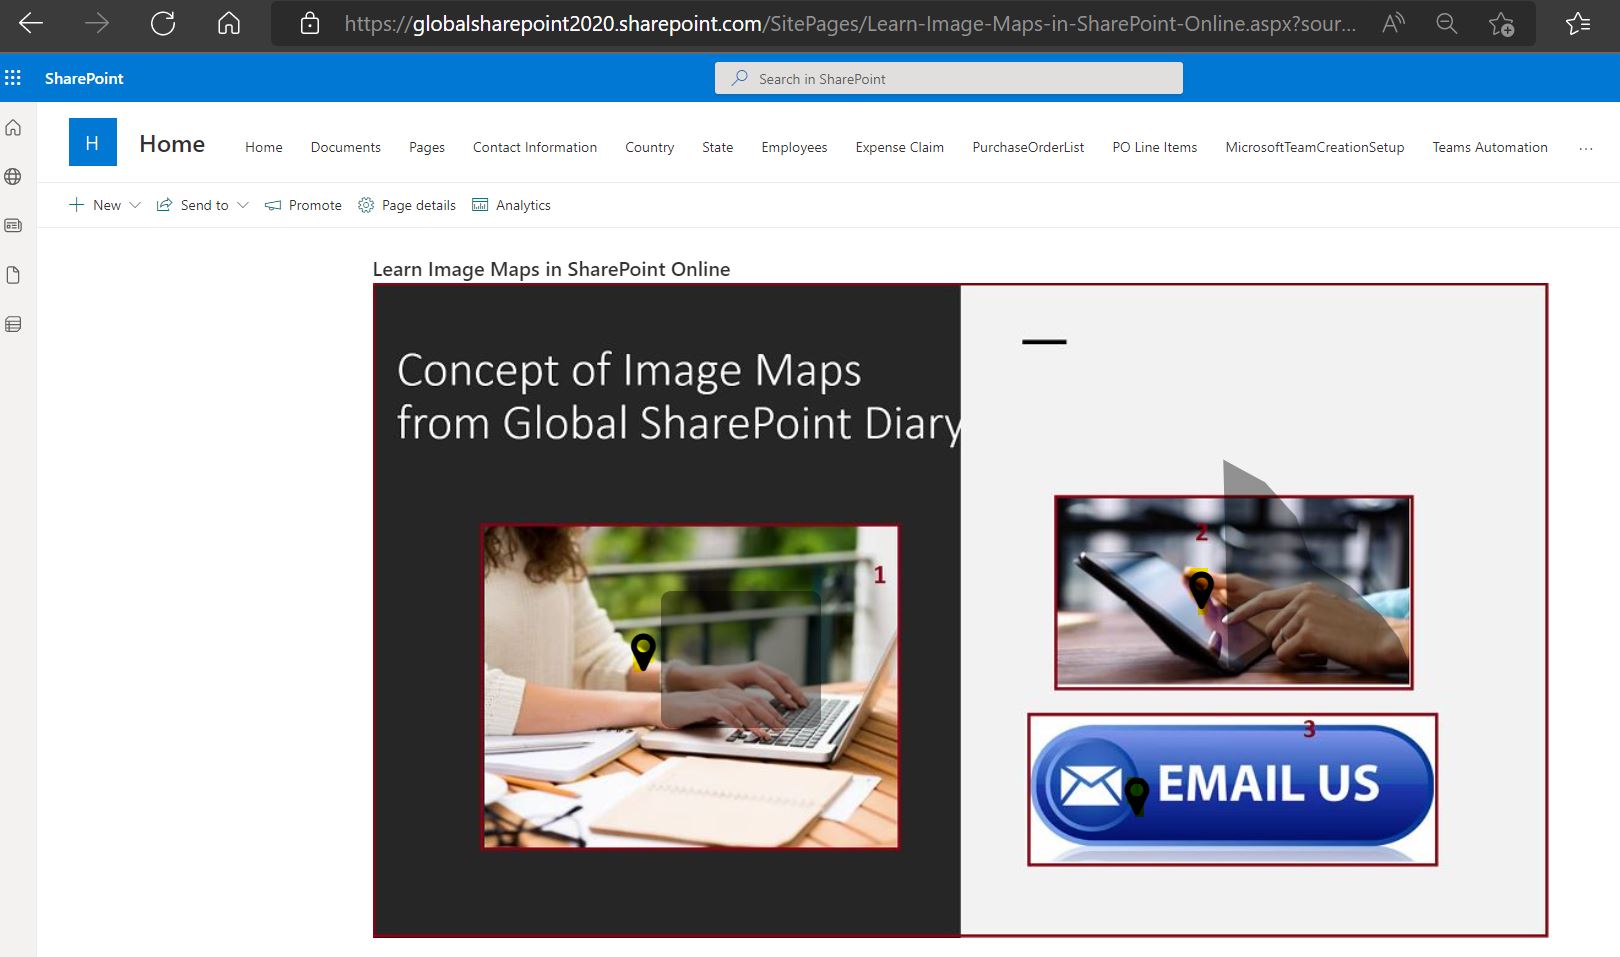 Configure Image Maps in SharePoint Online Page